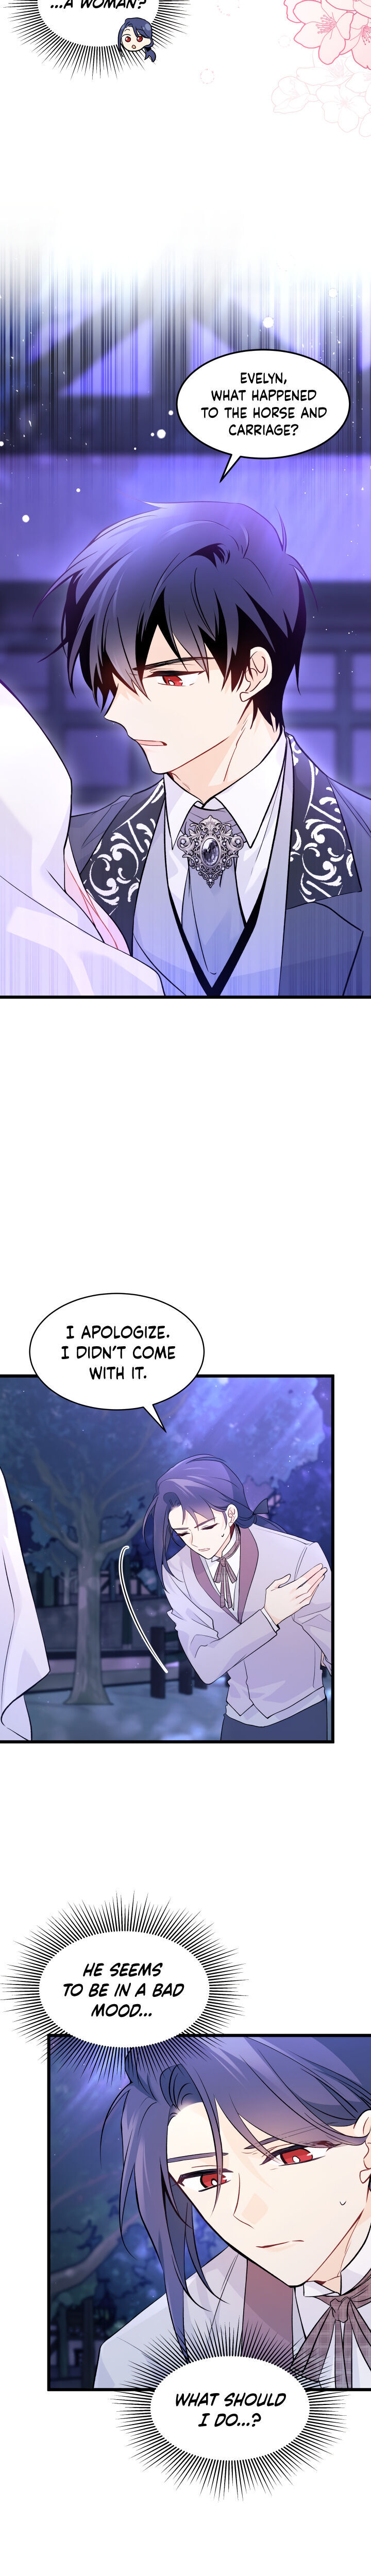 The Symbiotic Relationship Between A Rabbit and A Black Panther - Chapter 38 Page 8